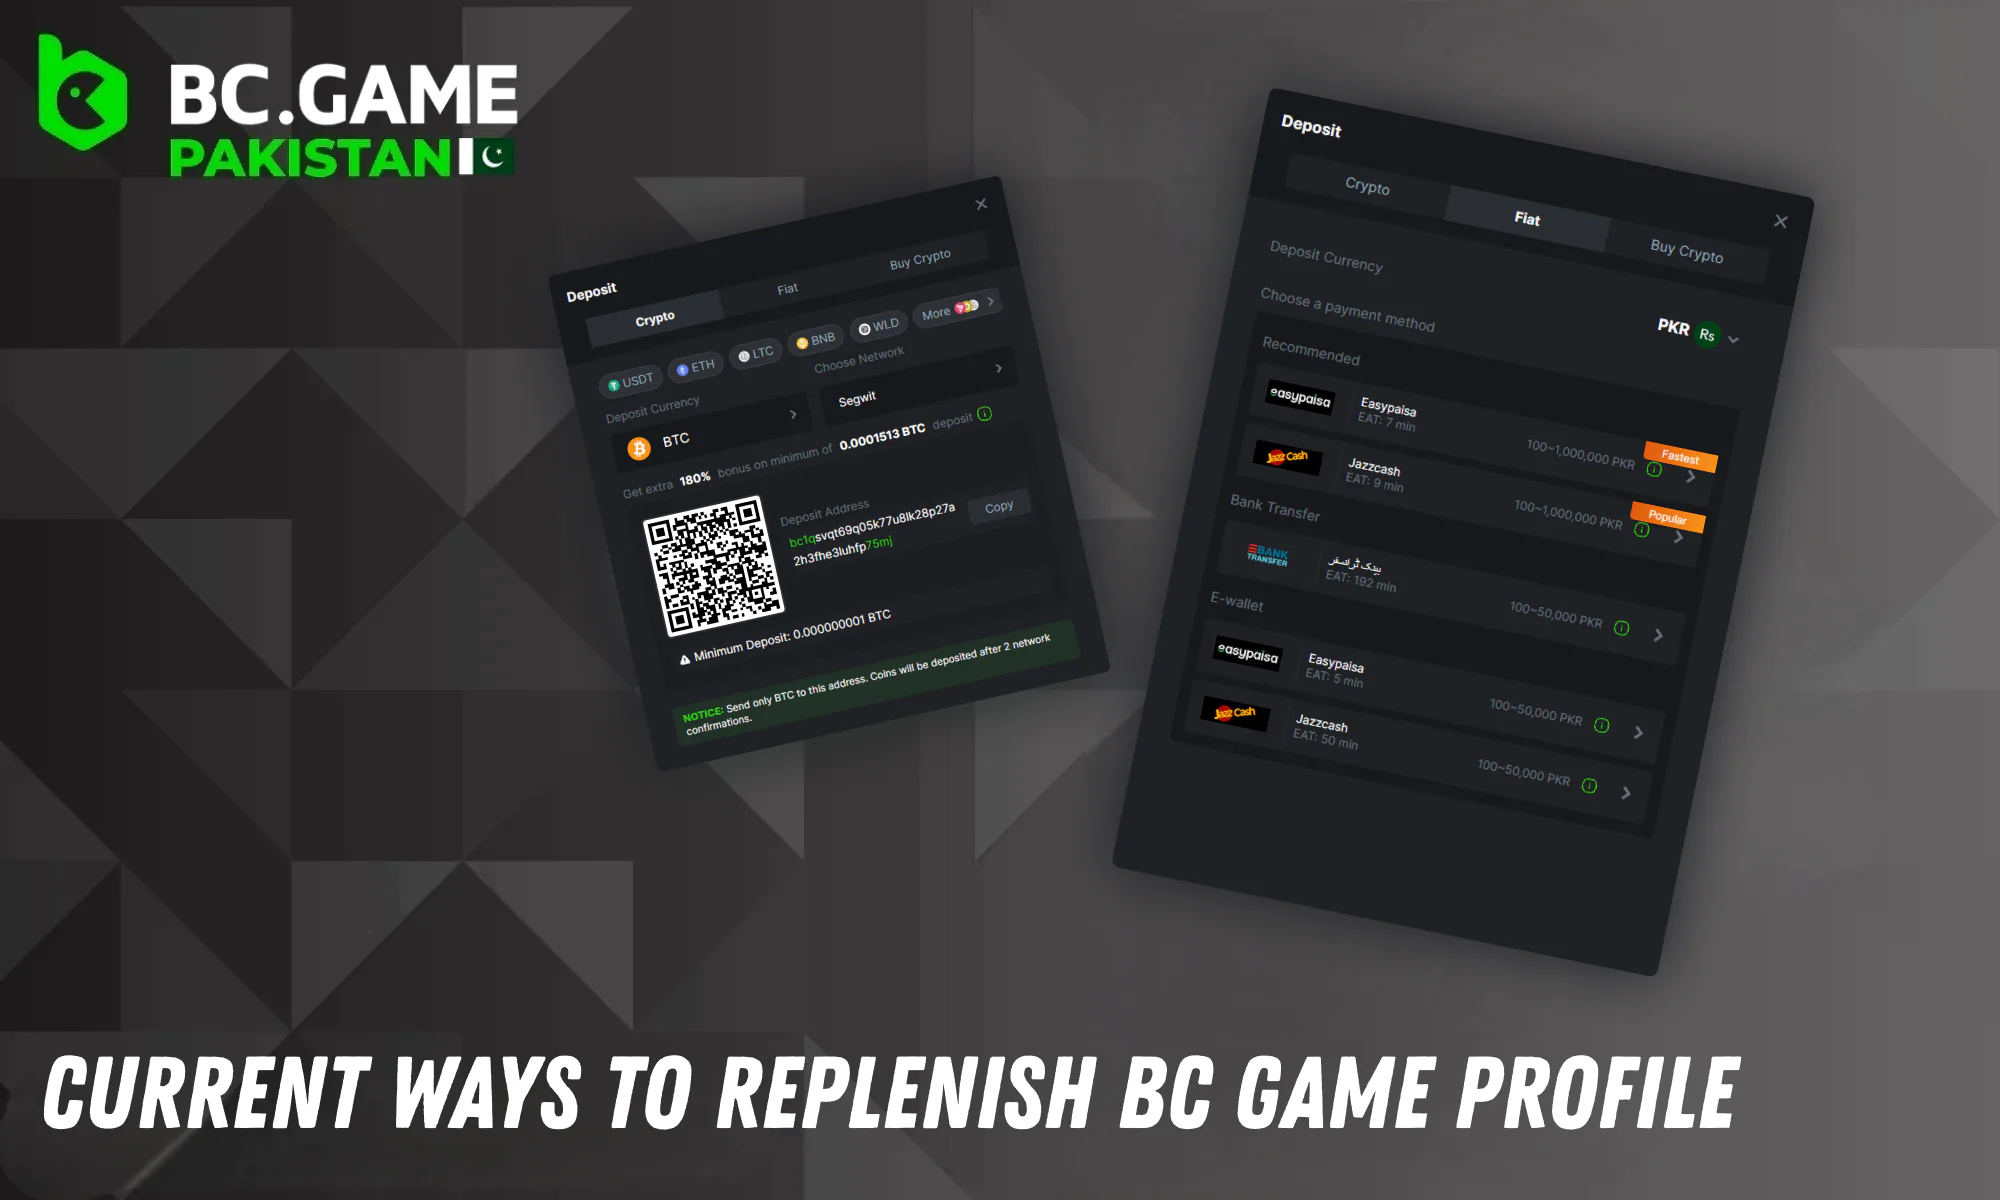 BC Game offers various ways to replenish a user's profile